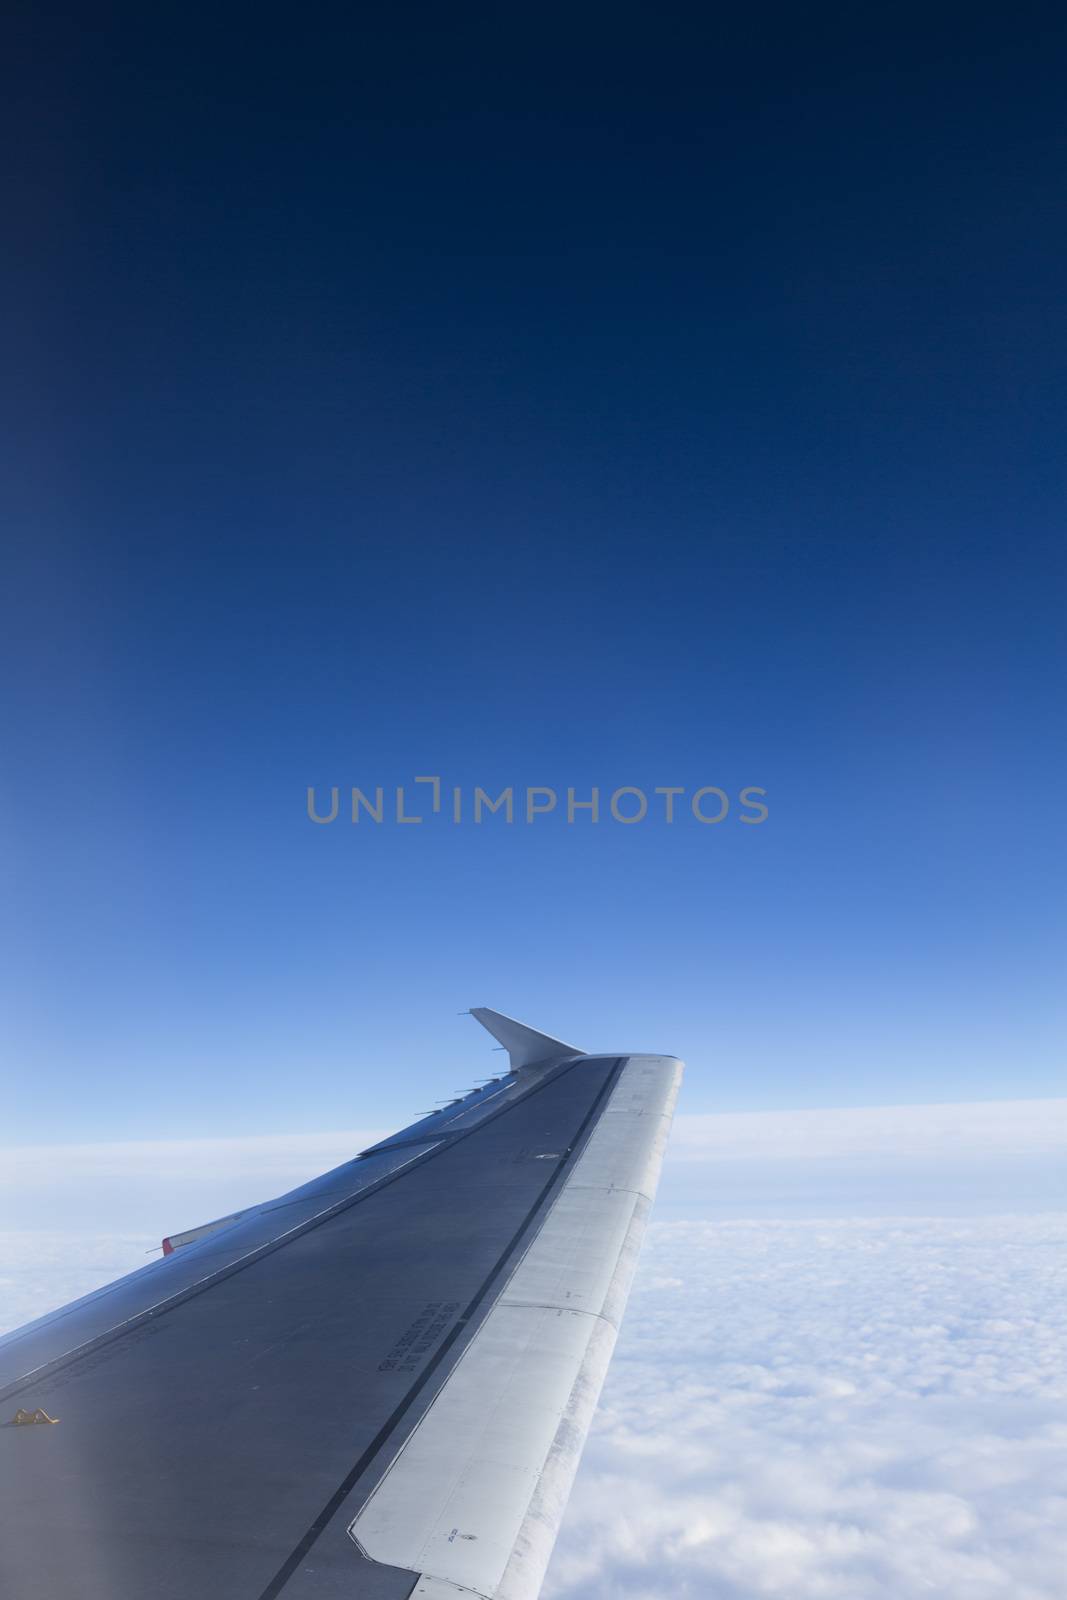 Airbus A320 Wing Against Blue Sky and Clouds  by Whiteboxmedia